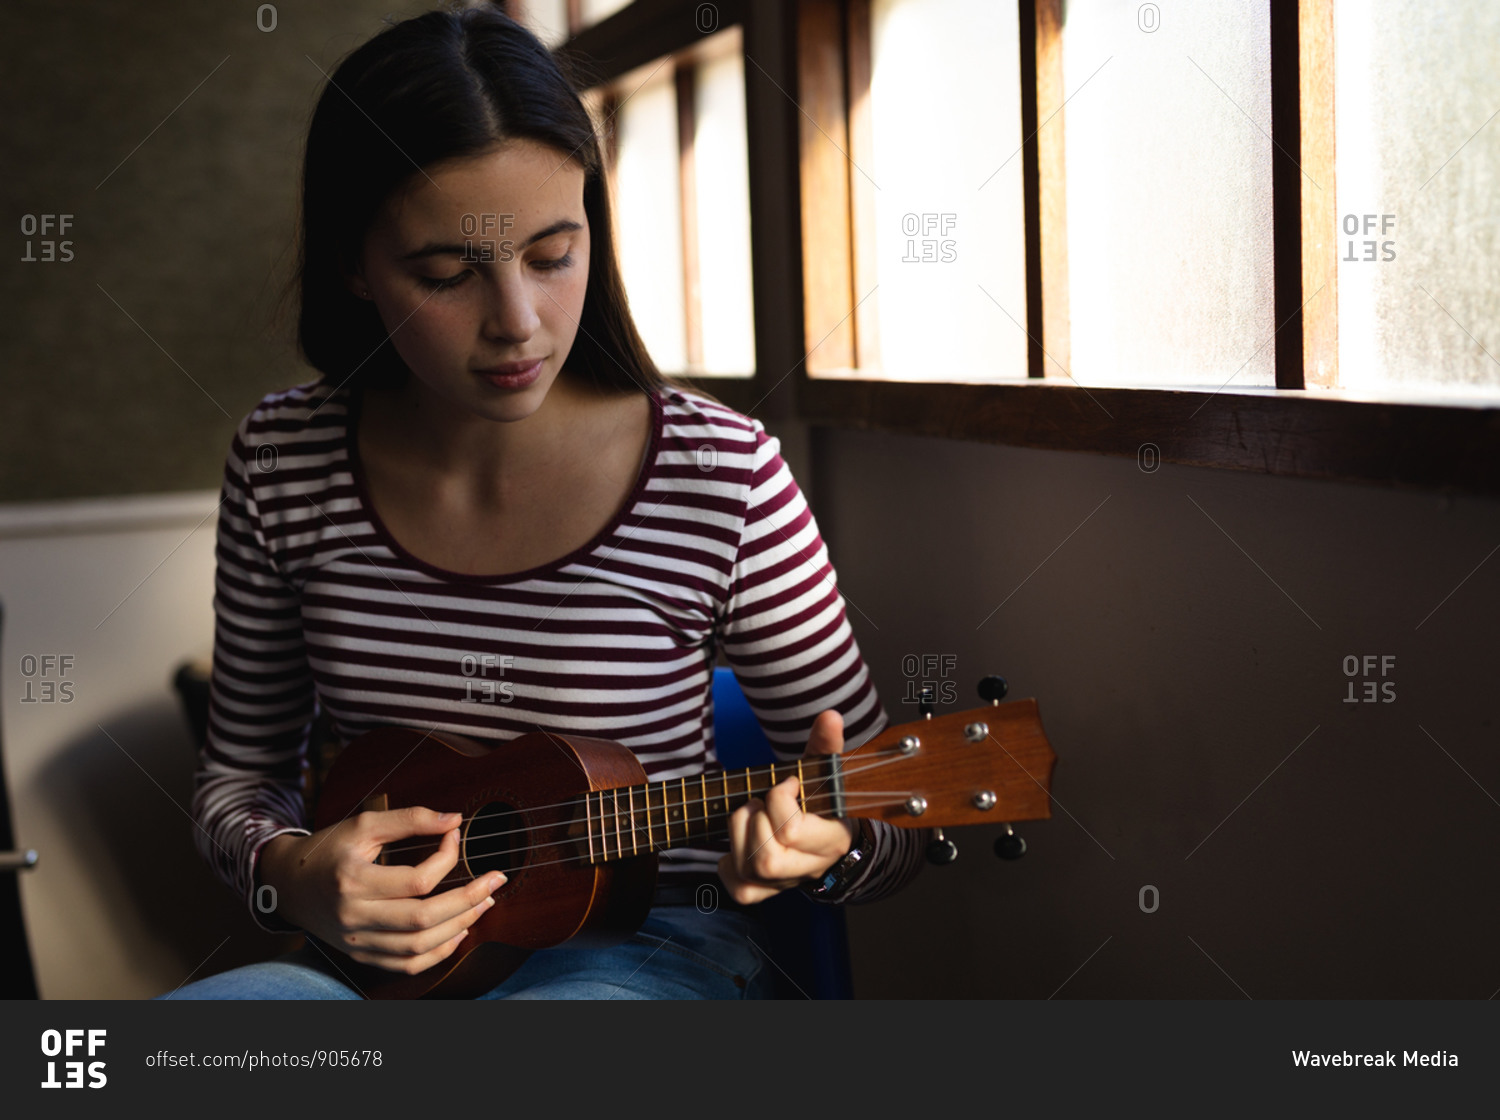 Portrait of a Caucasian musician teenage girl sitting by a window, looking down and playing a ukulele in a high school